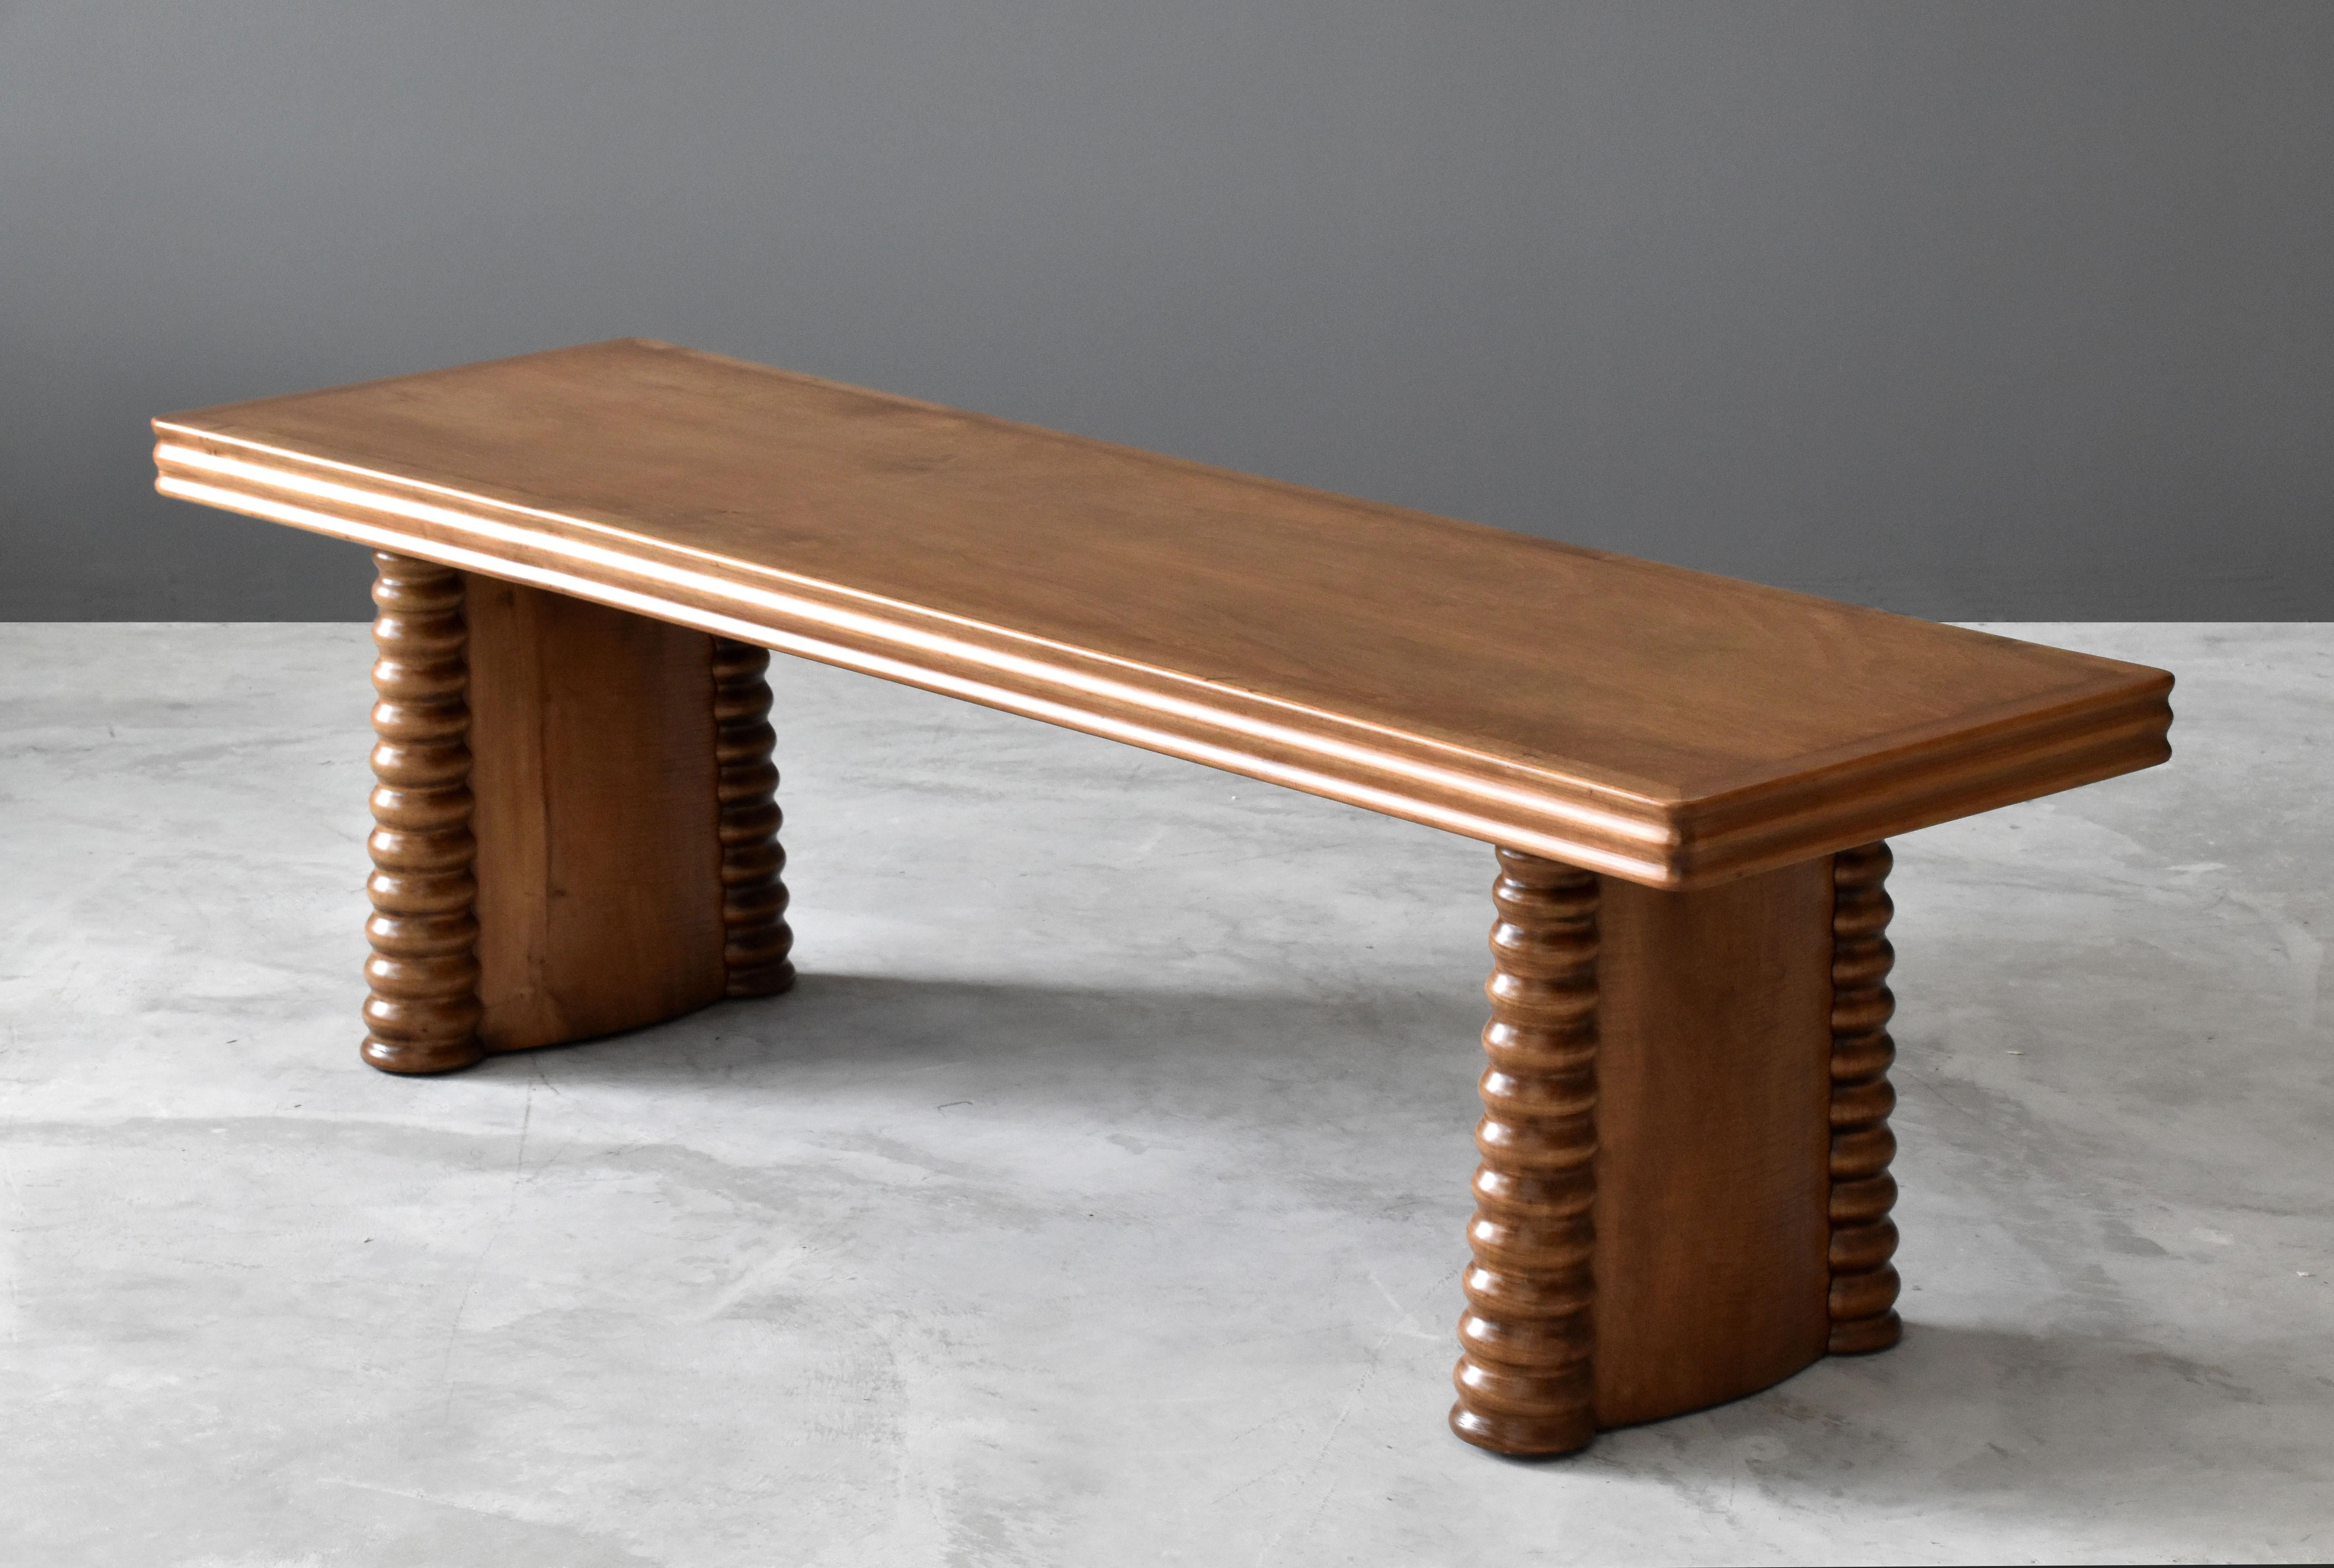 A bench or coffee or cocktail table, designed by Vittorio Valabrega, produced by his firm, Valabrega, in Turin, Italy, circa 1940. 

This simple modernist design is further enhanced by hand carved details.